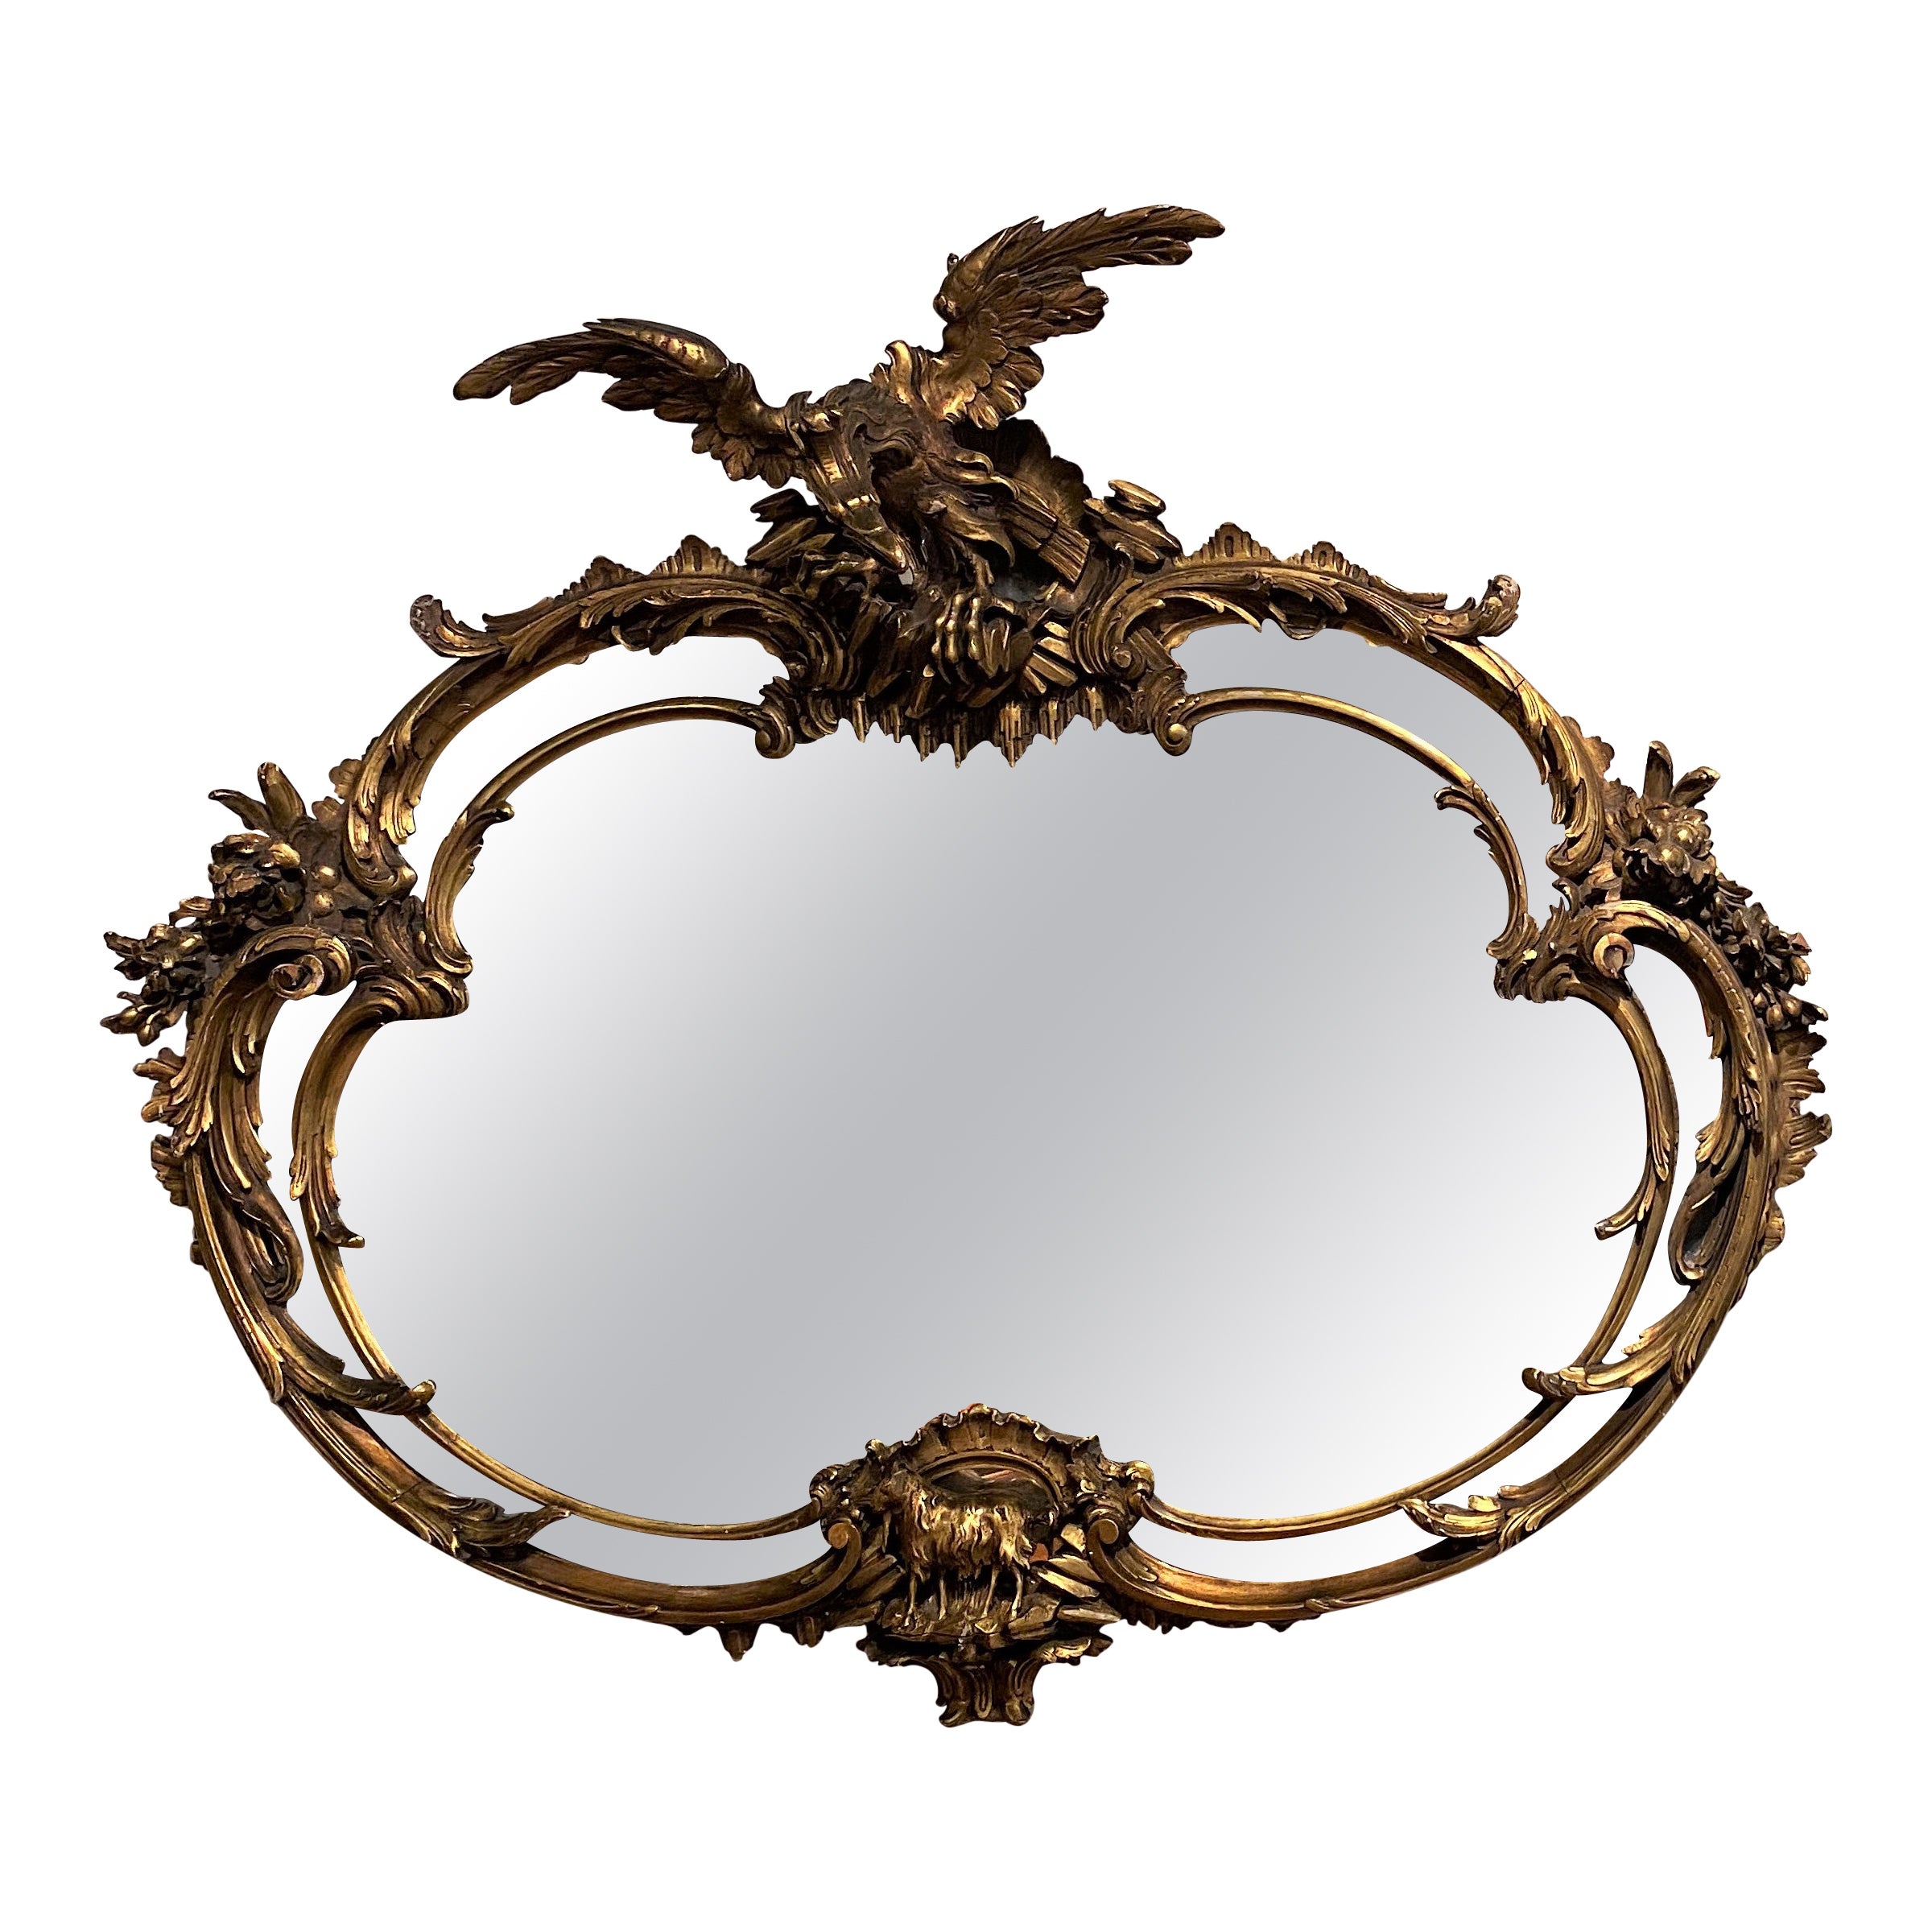 George III Style Heavily Carved Rococo Oval Giltwood Mirror with Eagle Crest